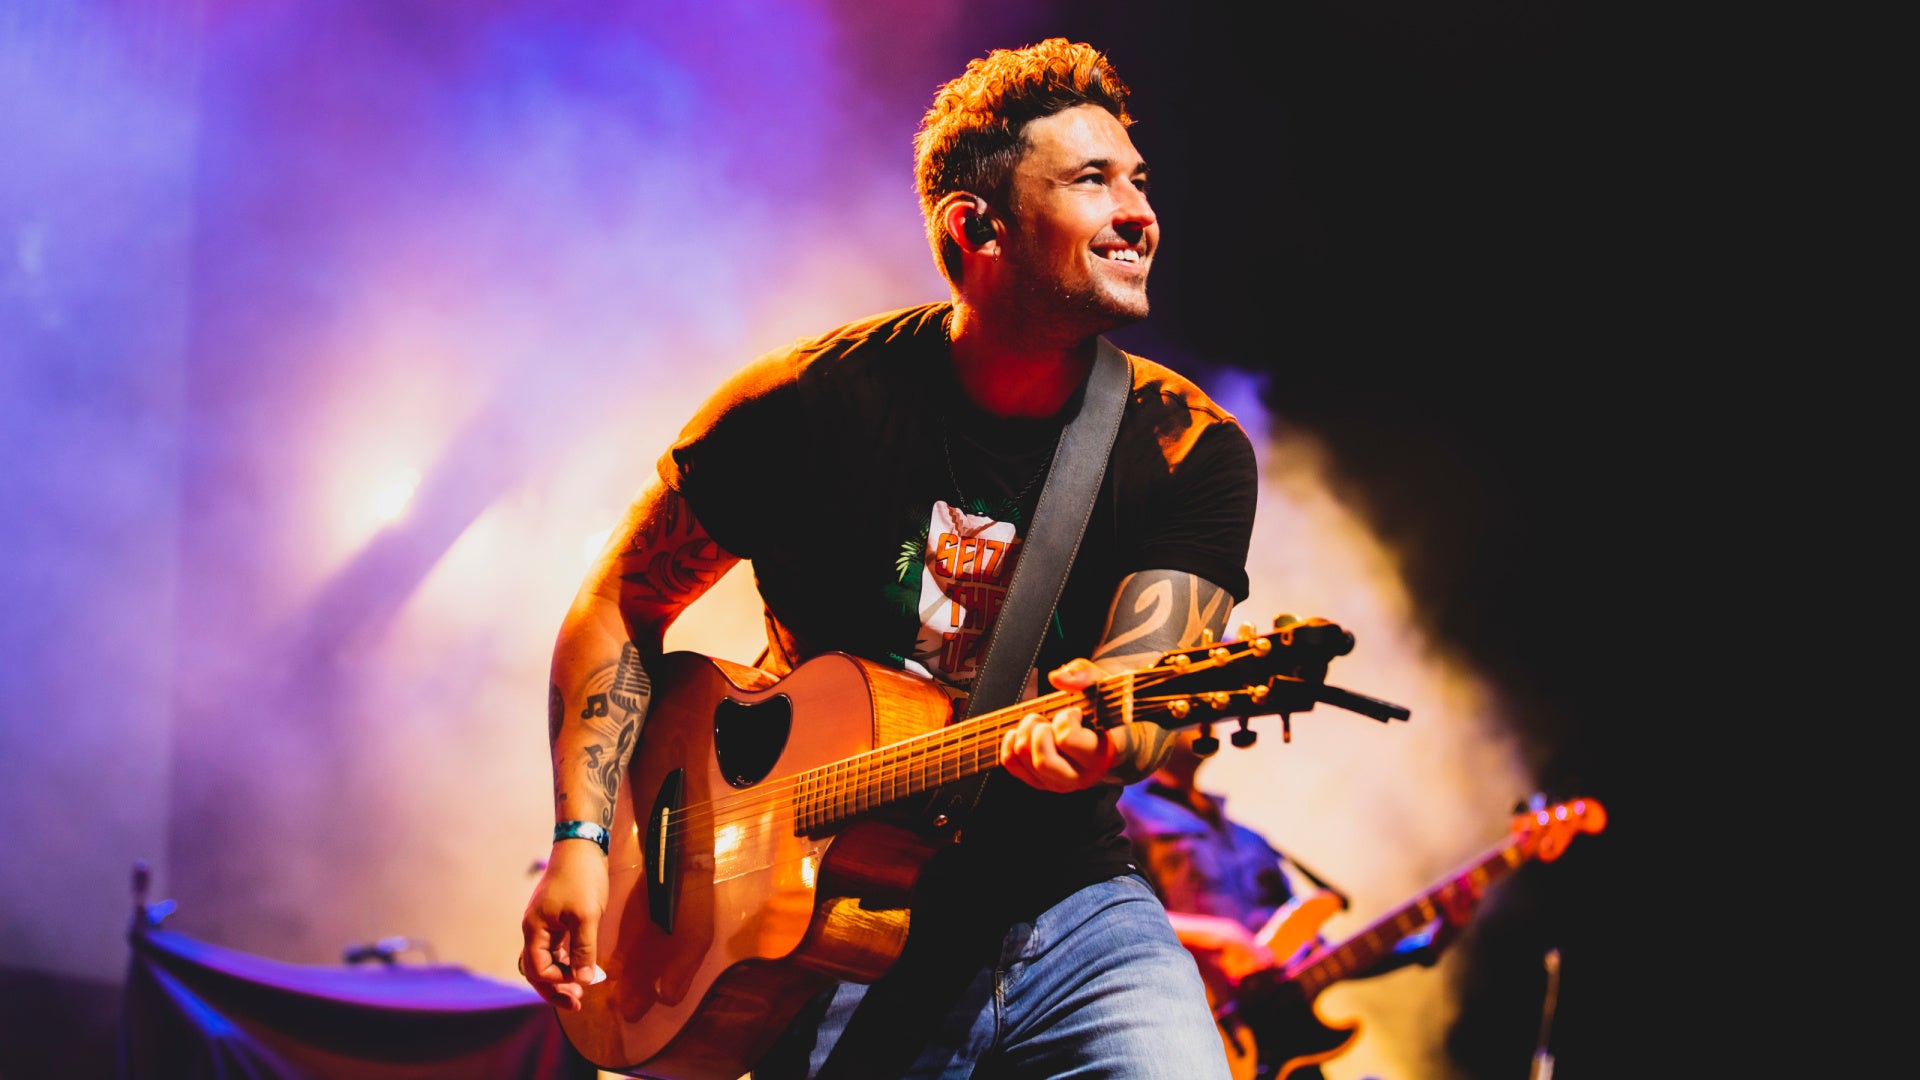 Join Us for Smoke & Song: A Michael Ray Concert & BBQ Event at Tooth & Nail Winery